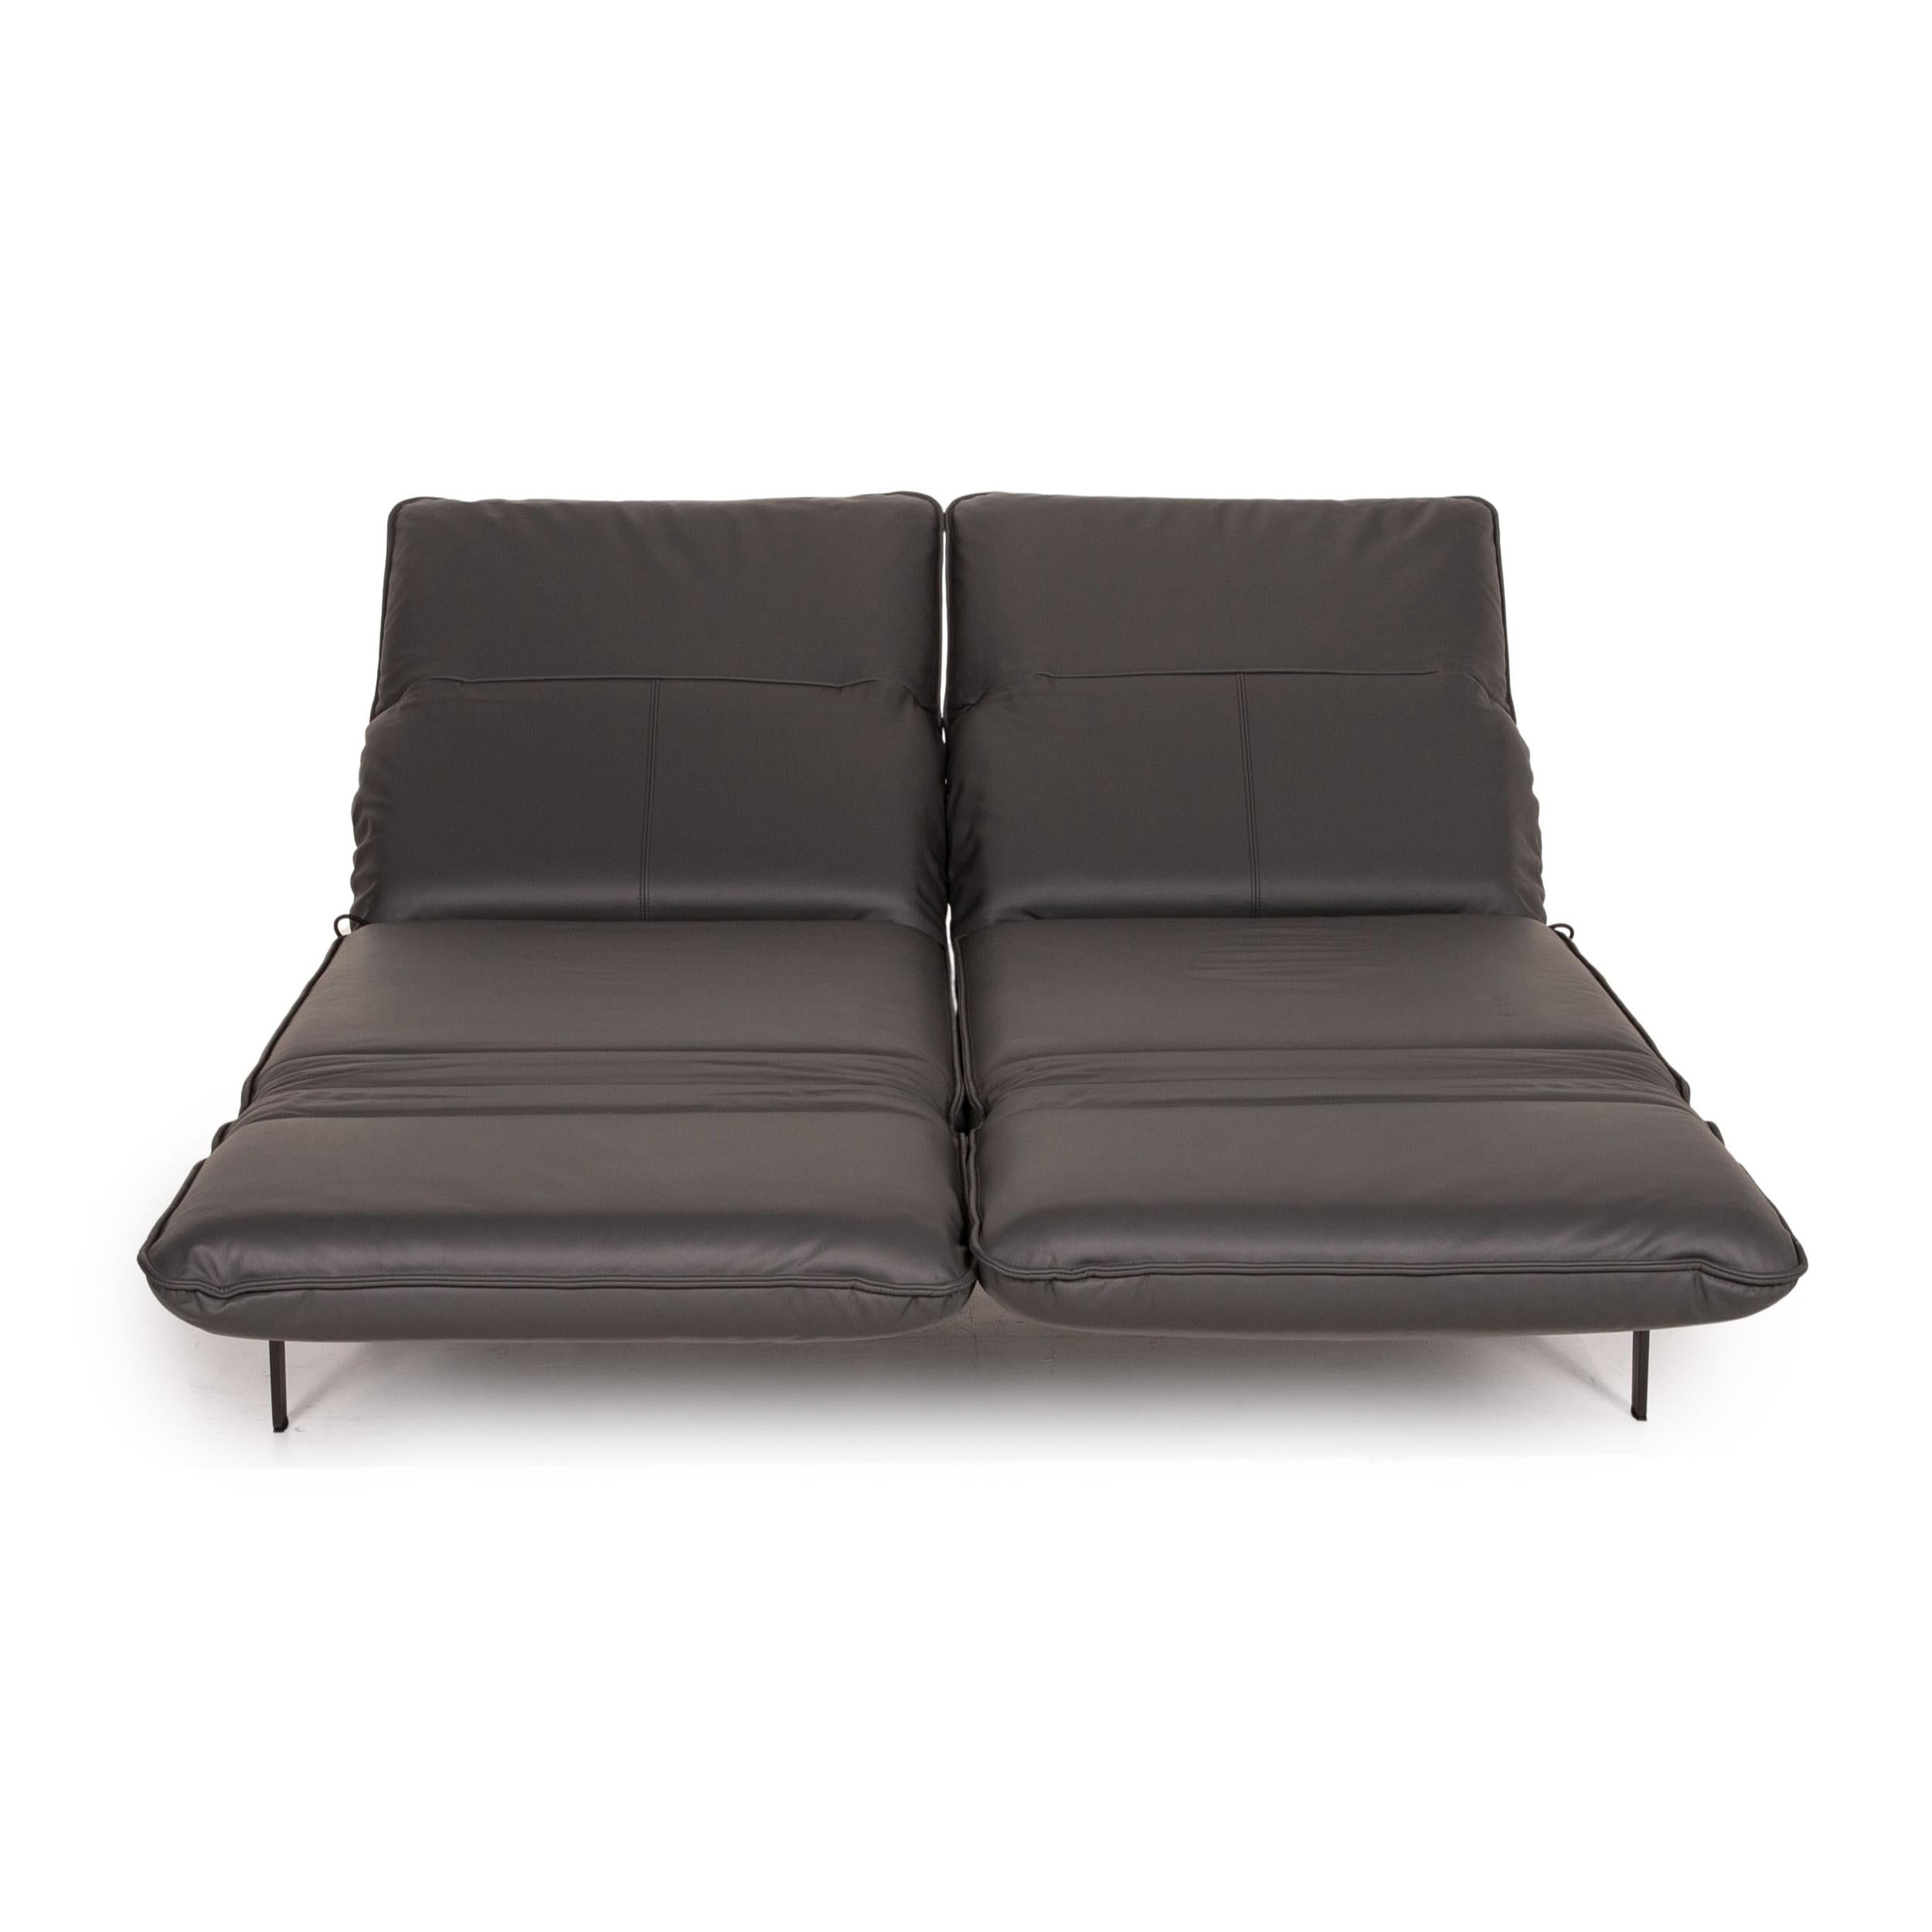 Modern Rolf Benz Mera Leather Sofa Gray Dark Gray Two-Seater Function Relax Function